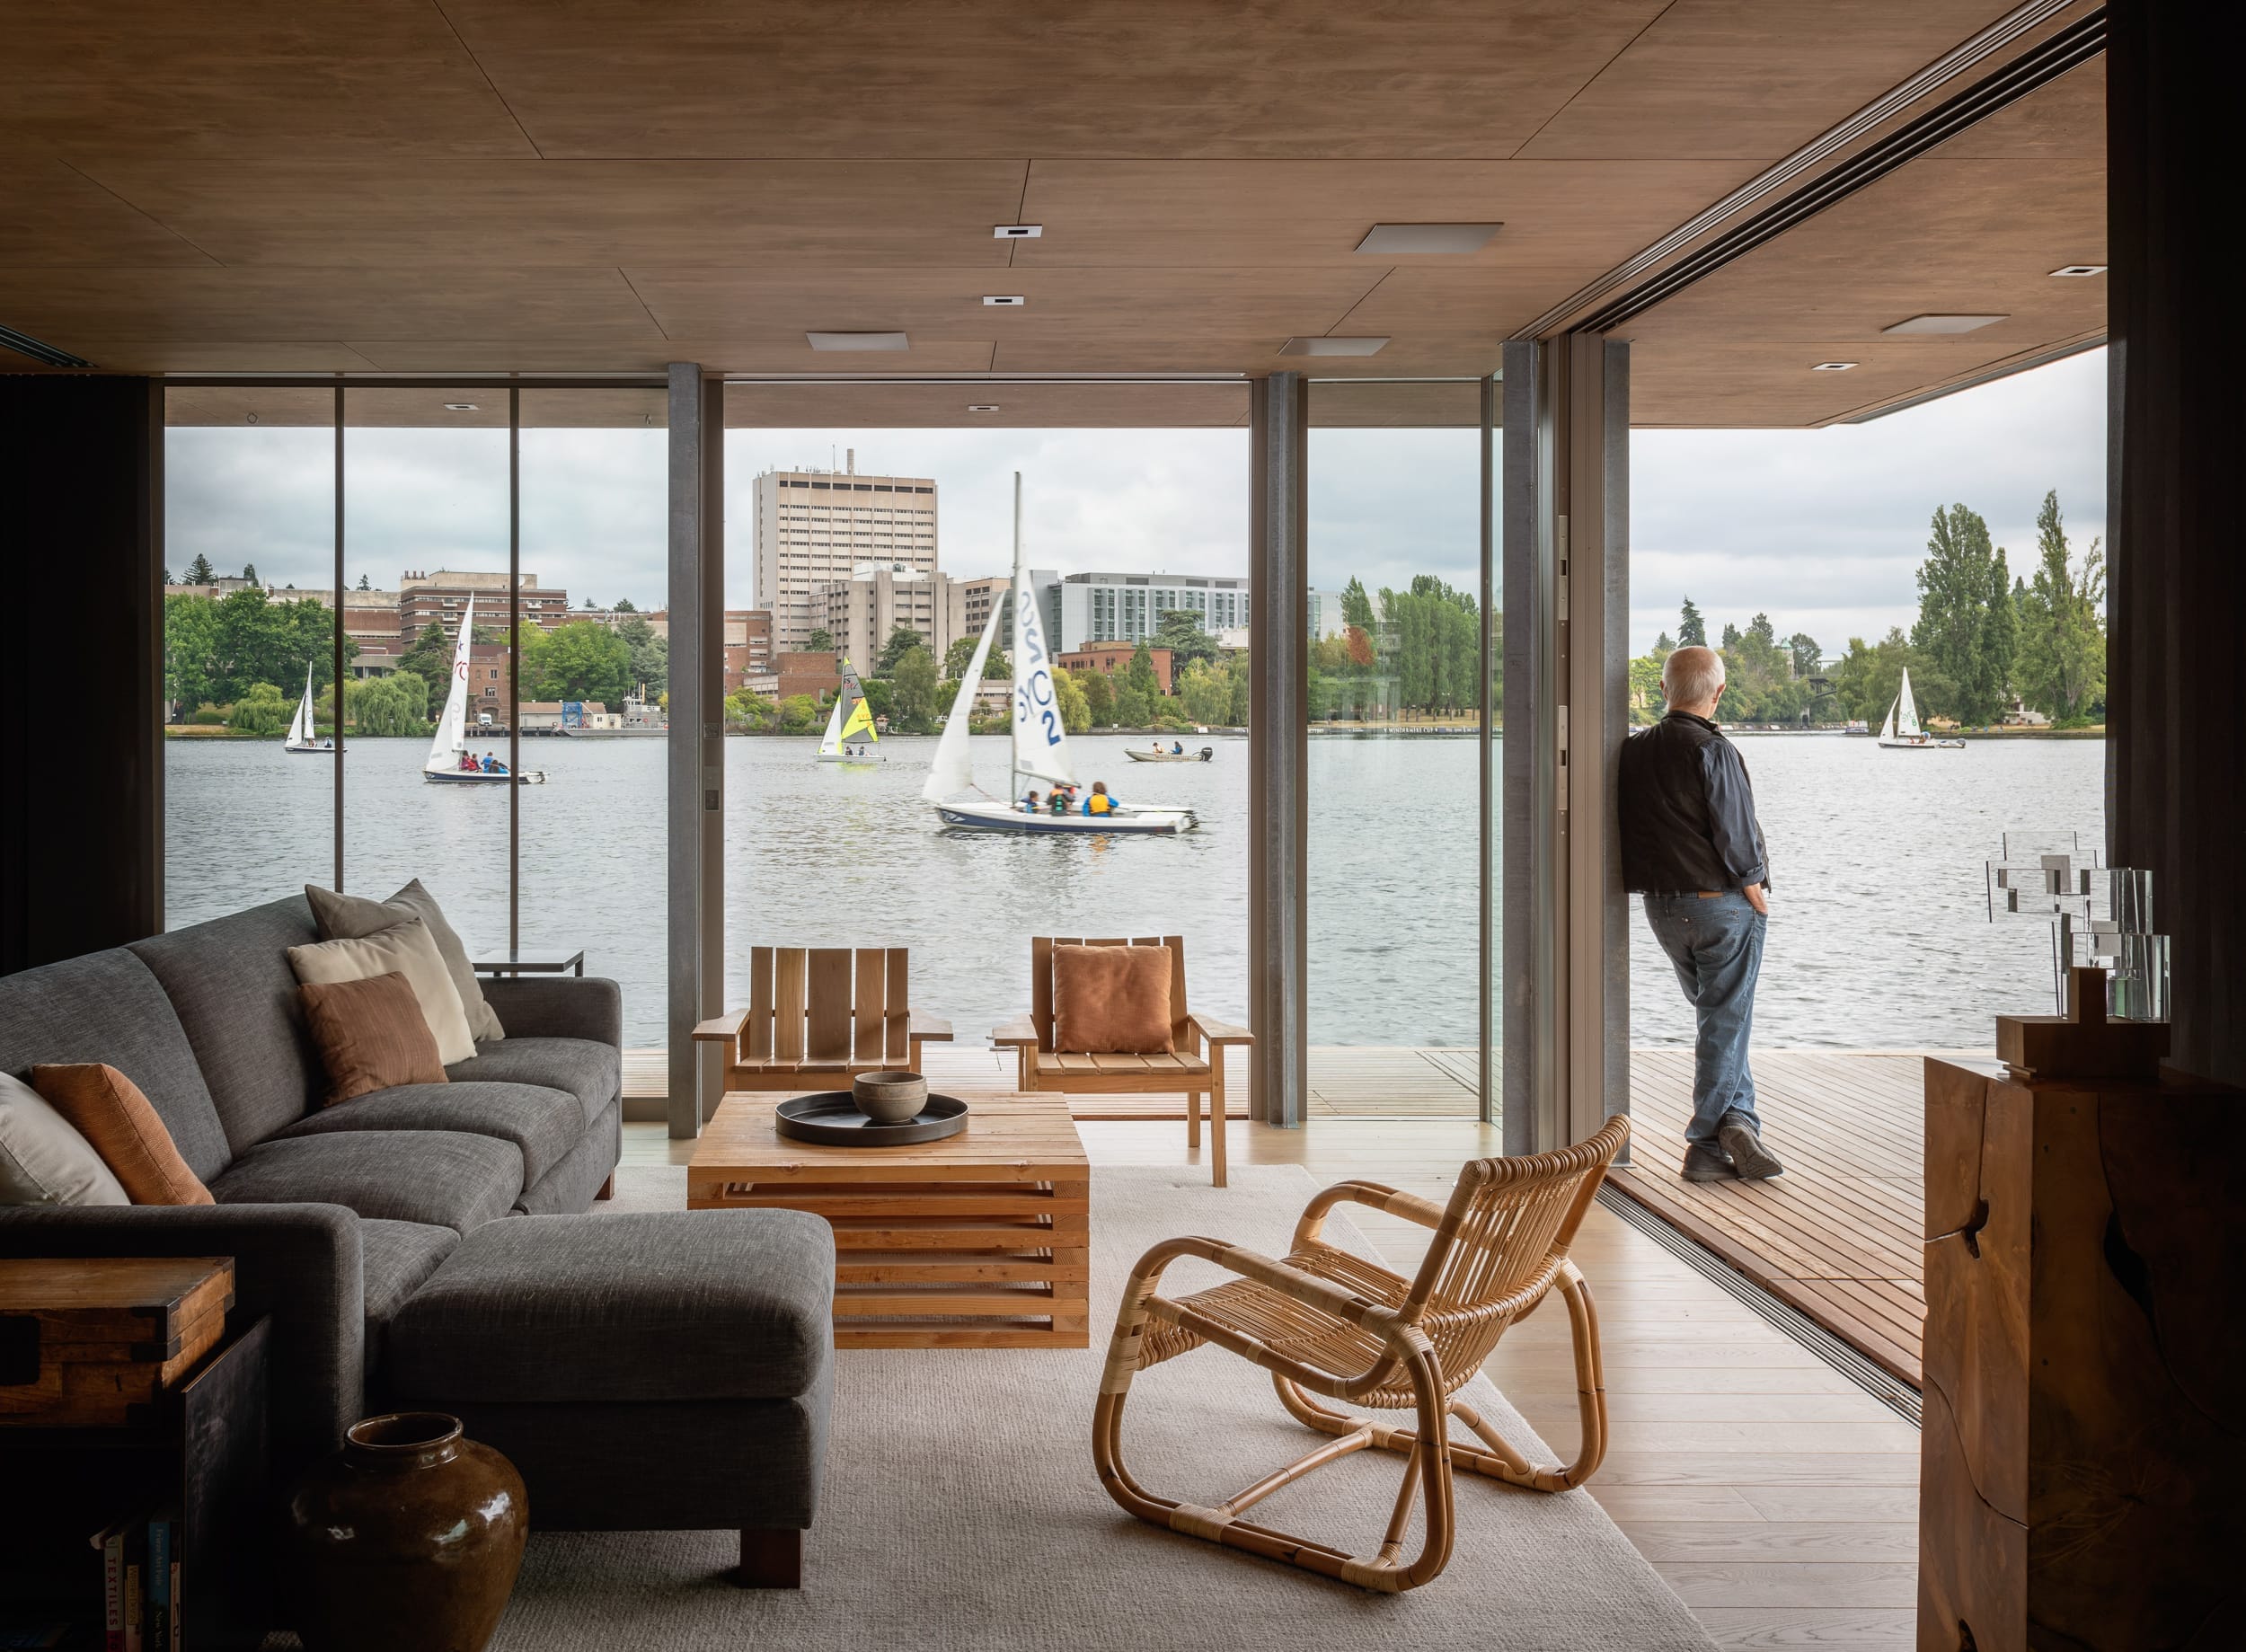 A floating home with large windows overlooking a body of water.